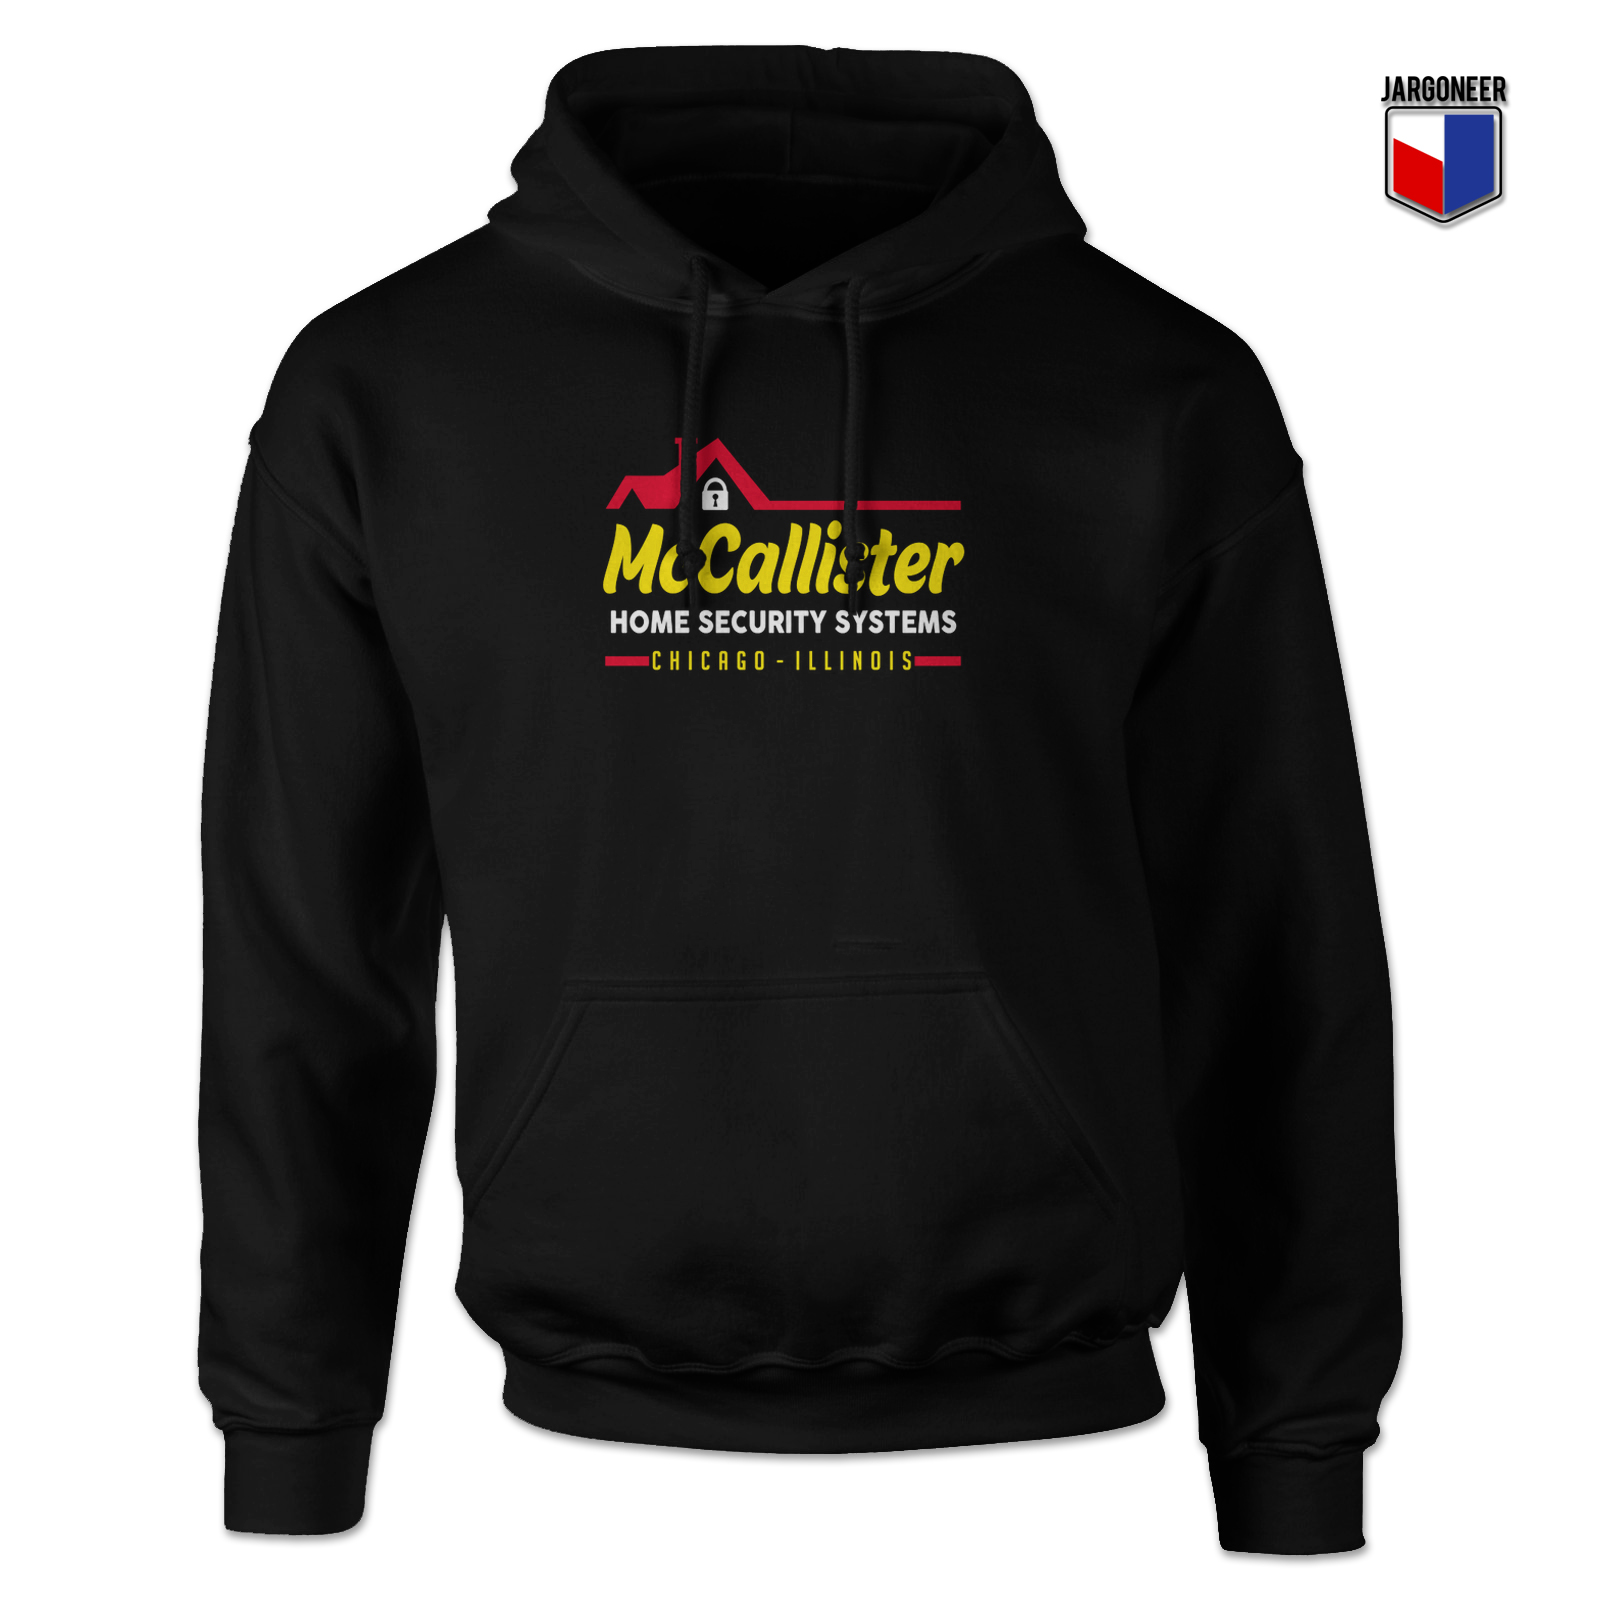 McCallister Home Security System Hoodie - Shop Unique Graphic Cool Shirt Designs